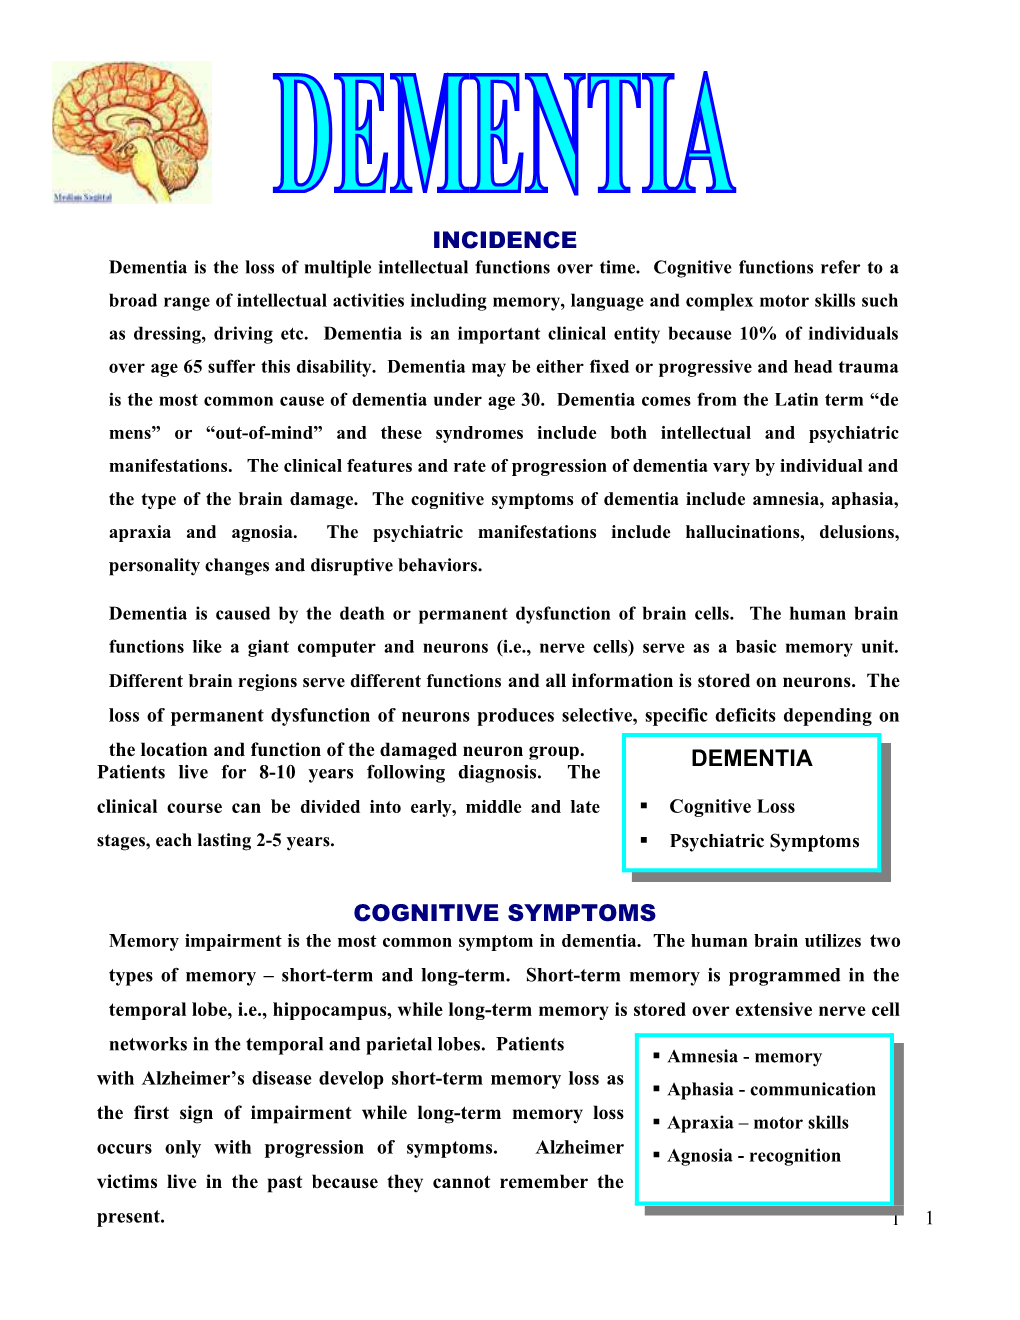 Dementia Is the Loss of Multiple Intellectual Functions Over Time. Cognitive Functions